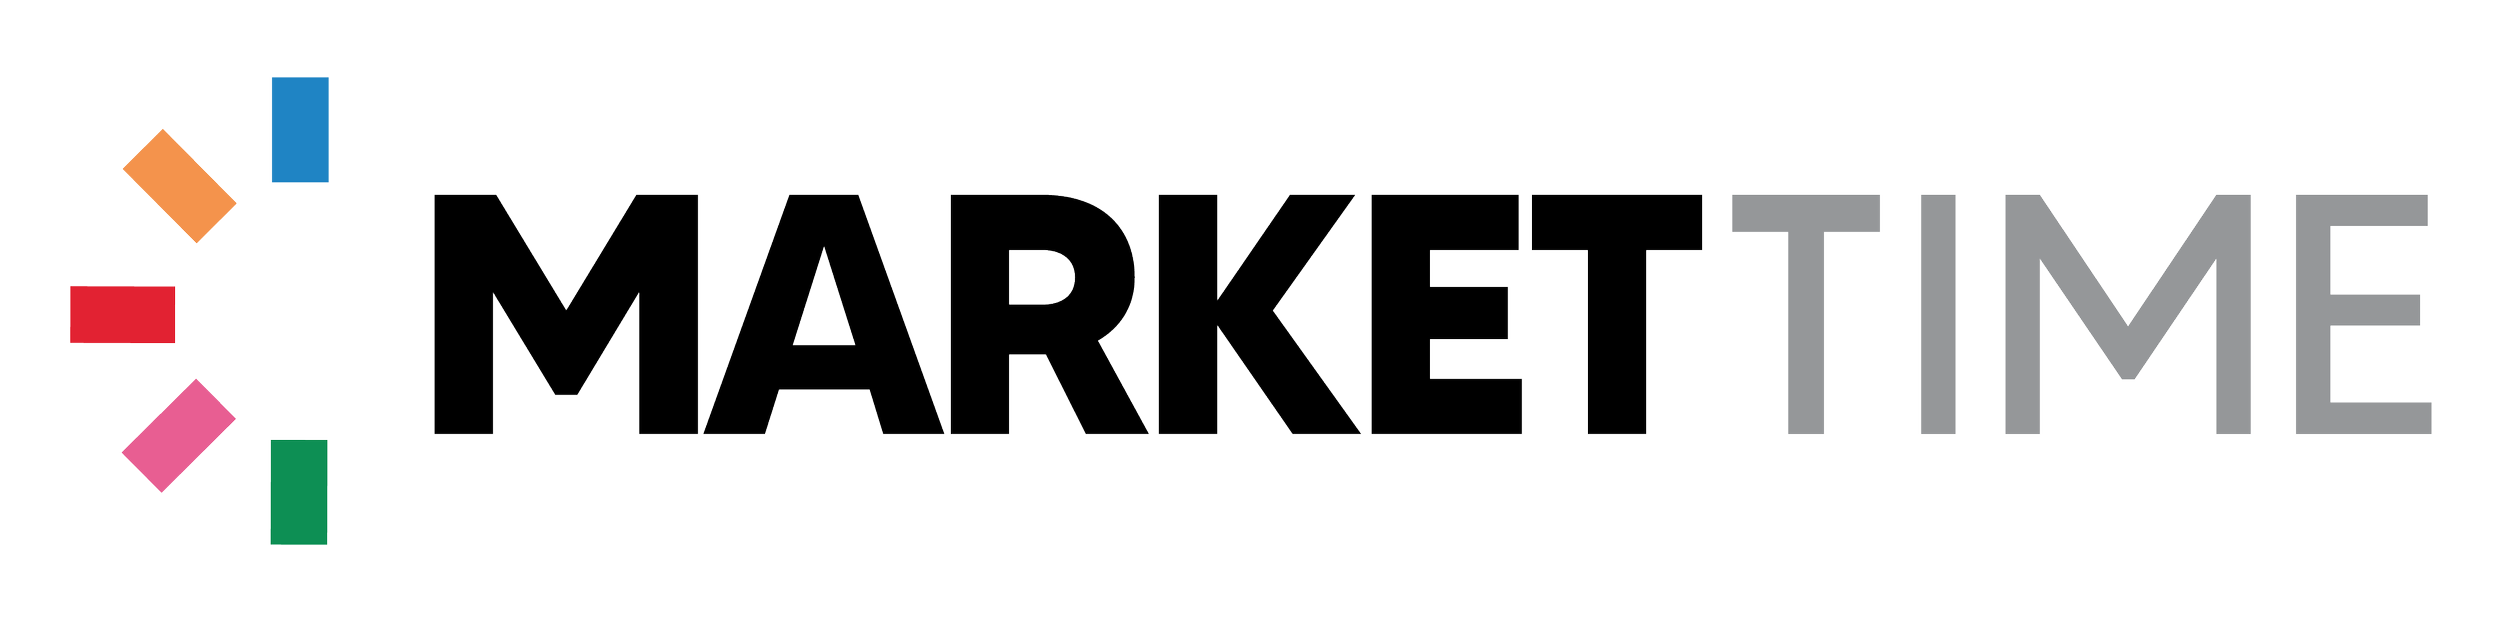 MarketTime_Logo_Primary_4cPos.png